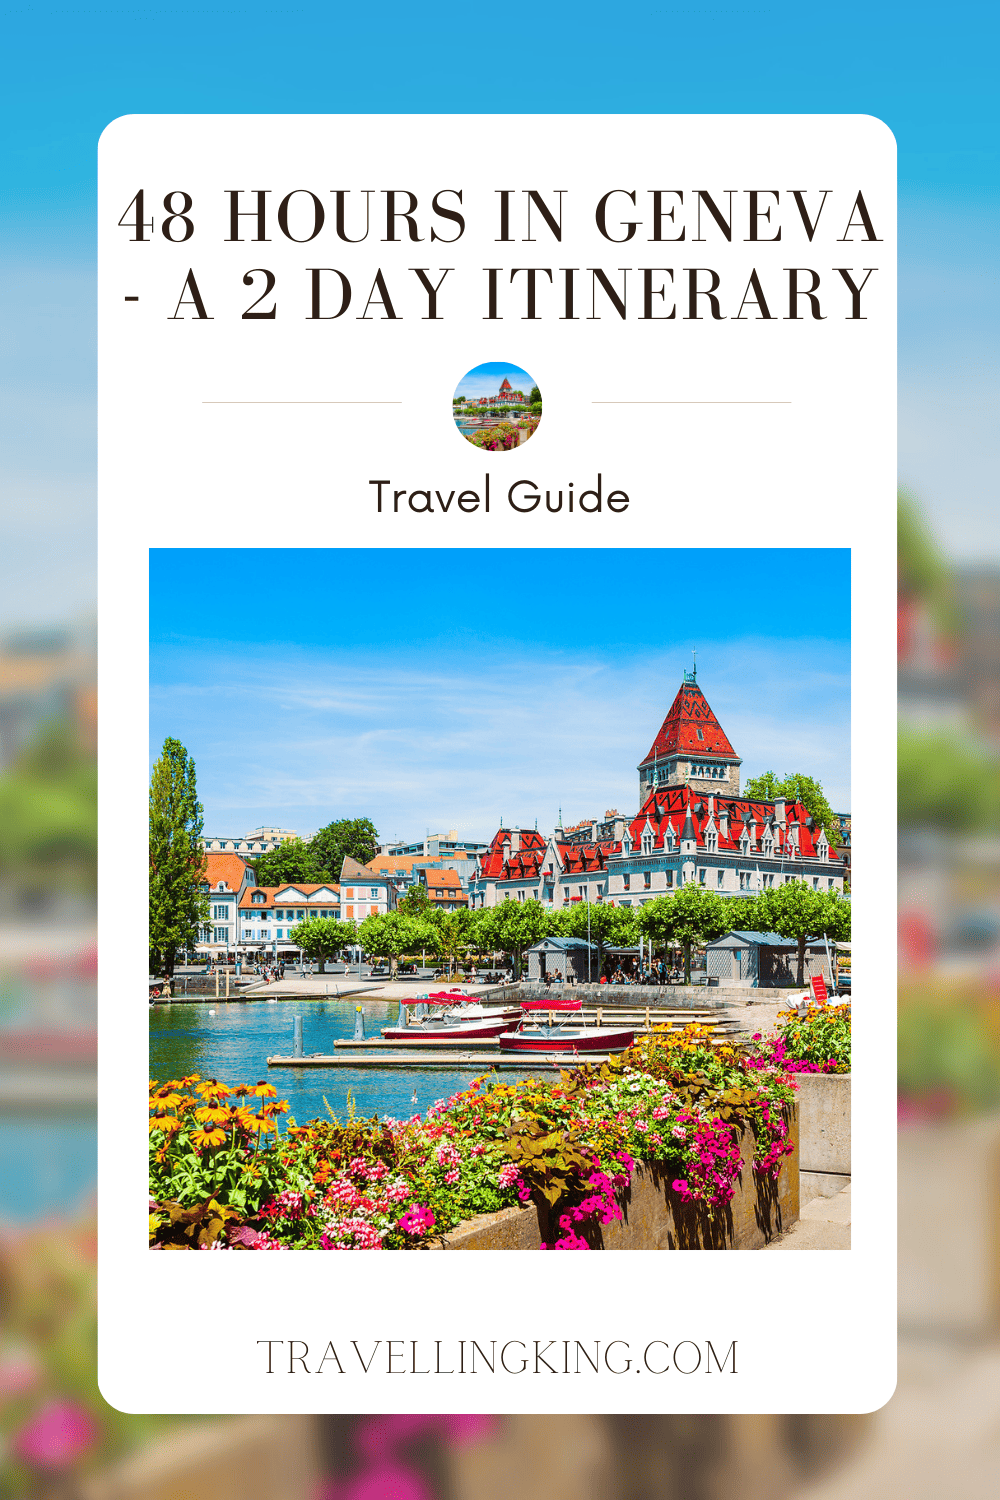 48 hours in Geneva - A 2 day Itinerary